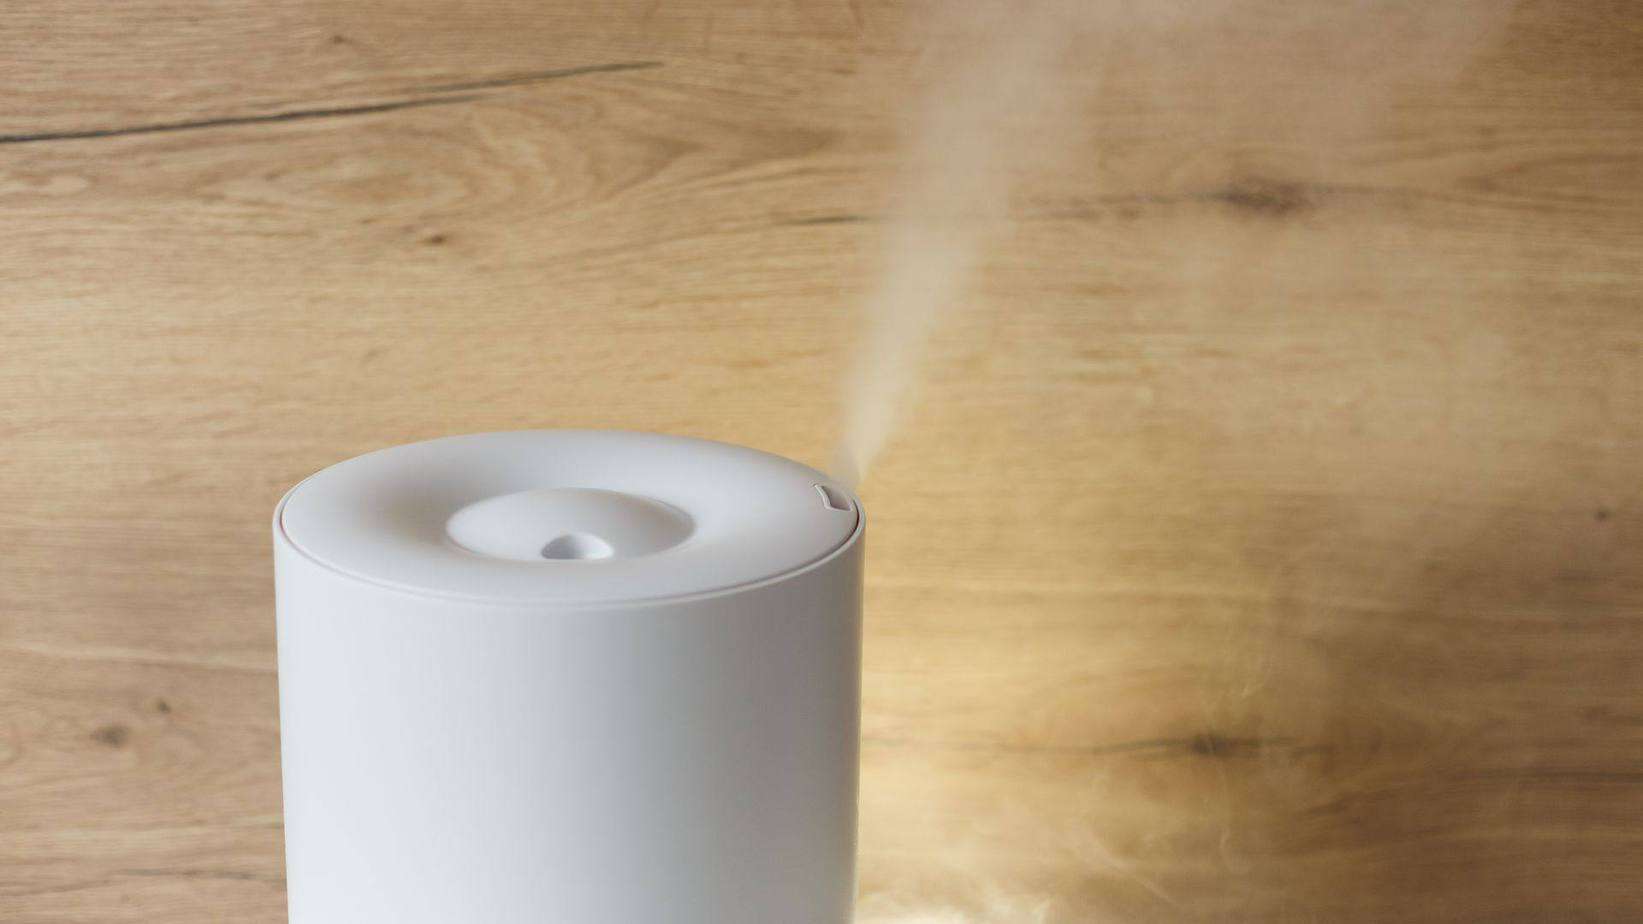 How Does A Humidifier Actually Work?